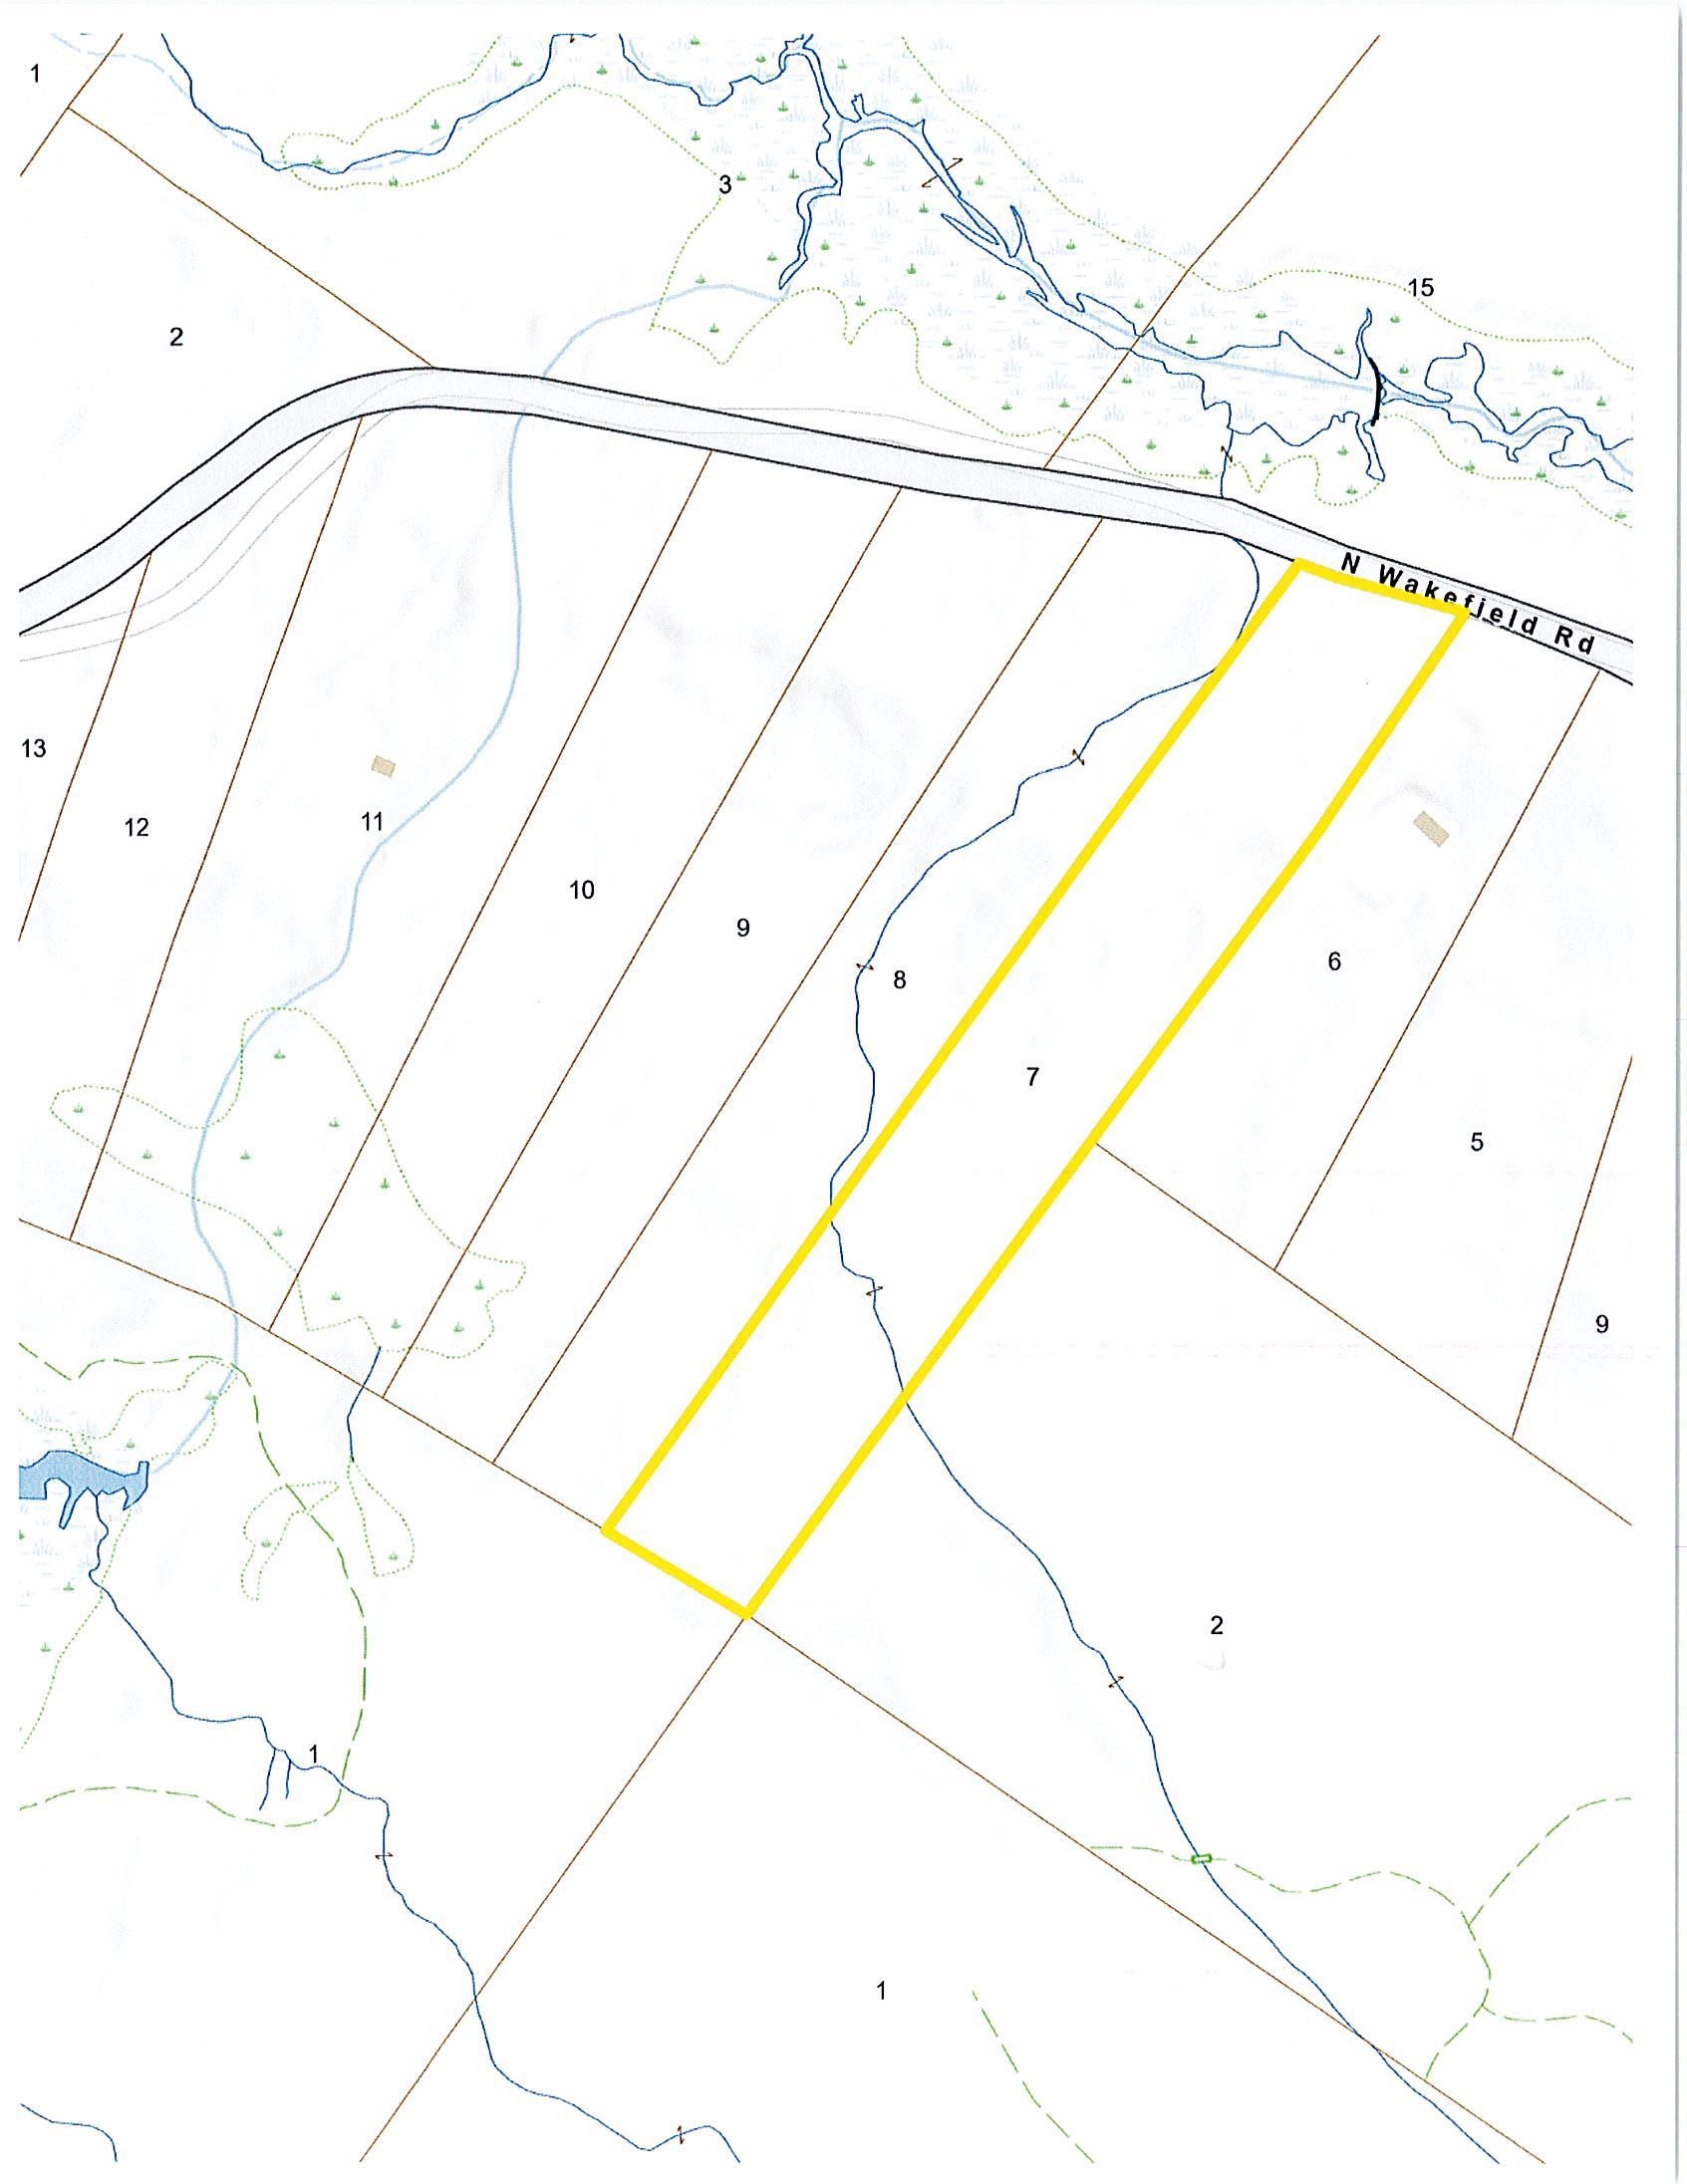 MAP 92, LOT 7 NORTH WAKEFIELD